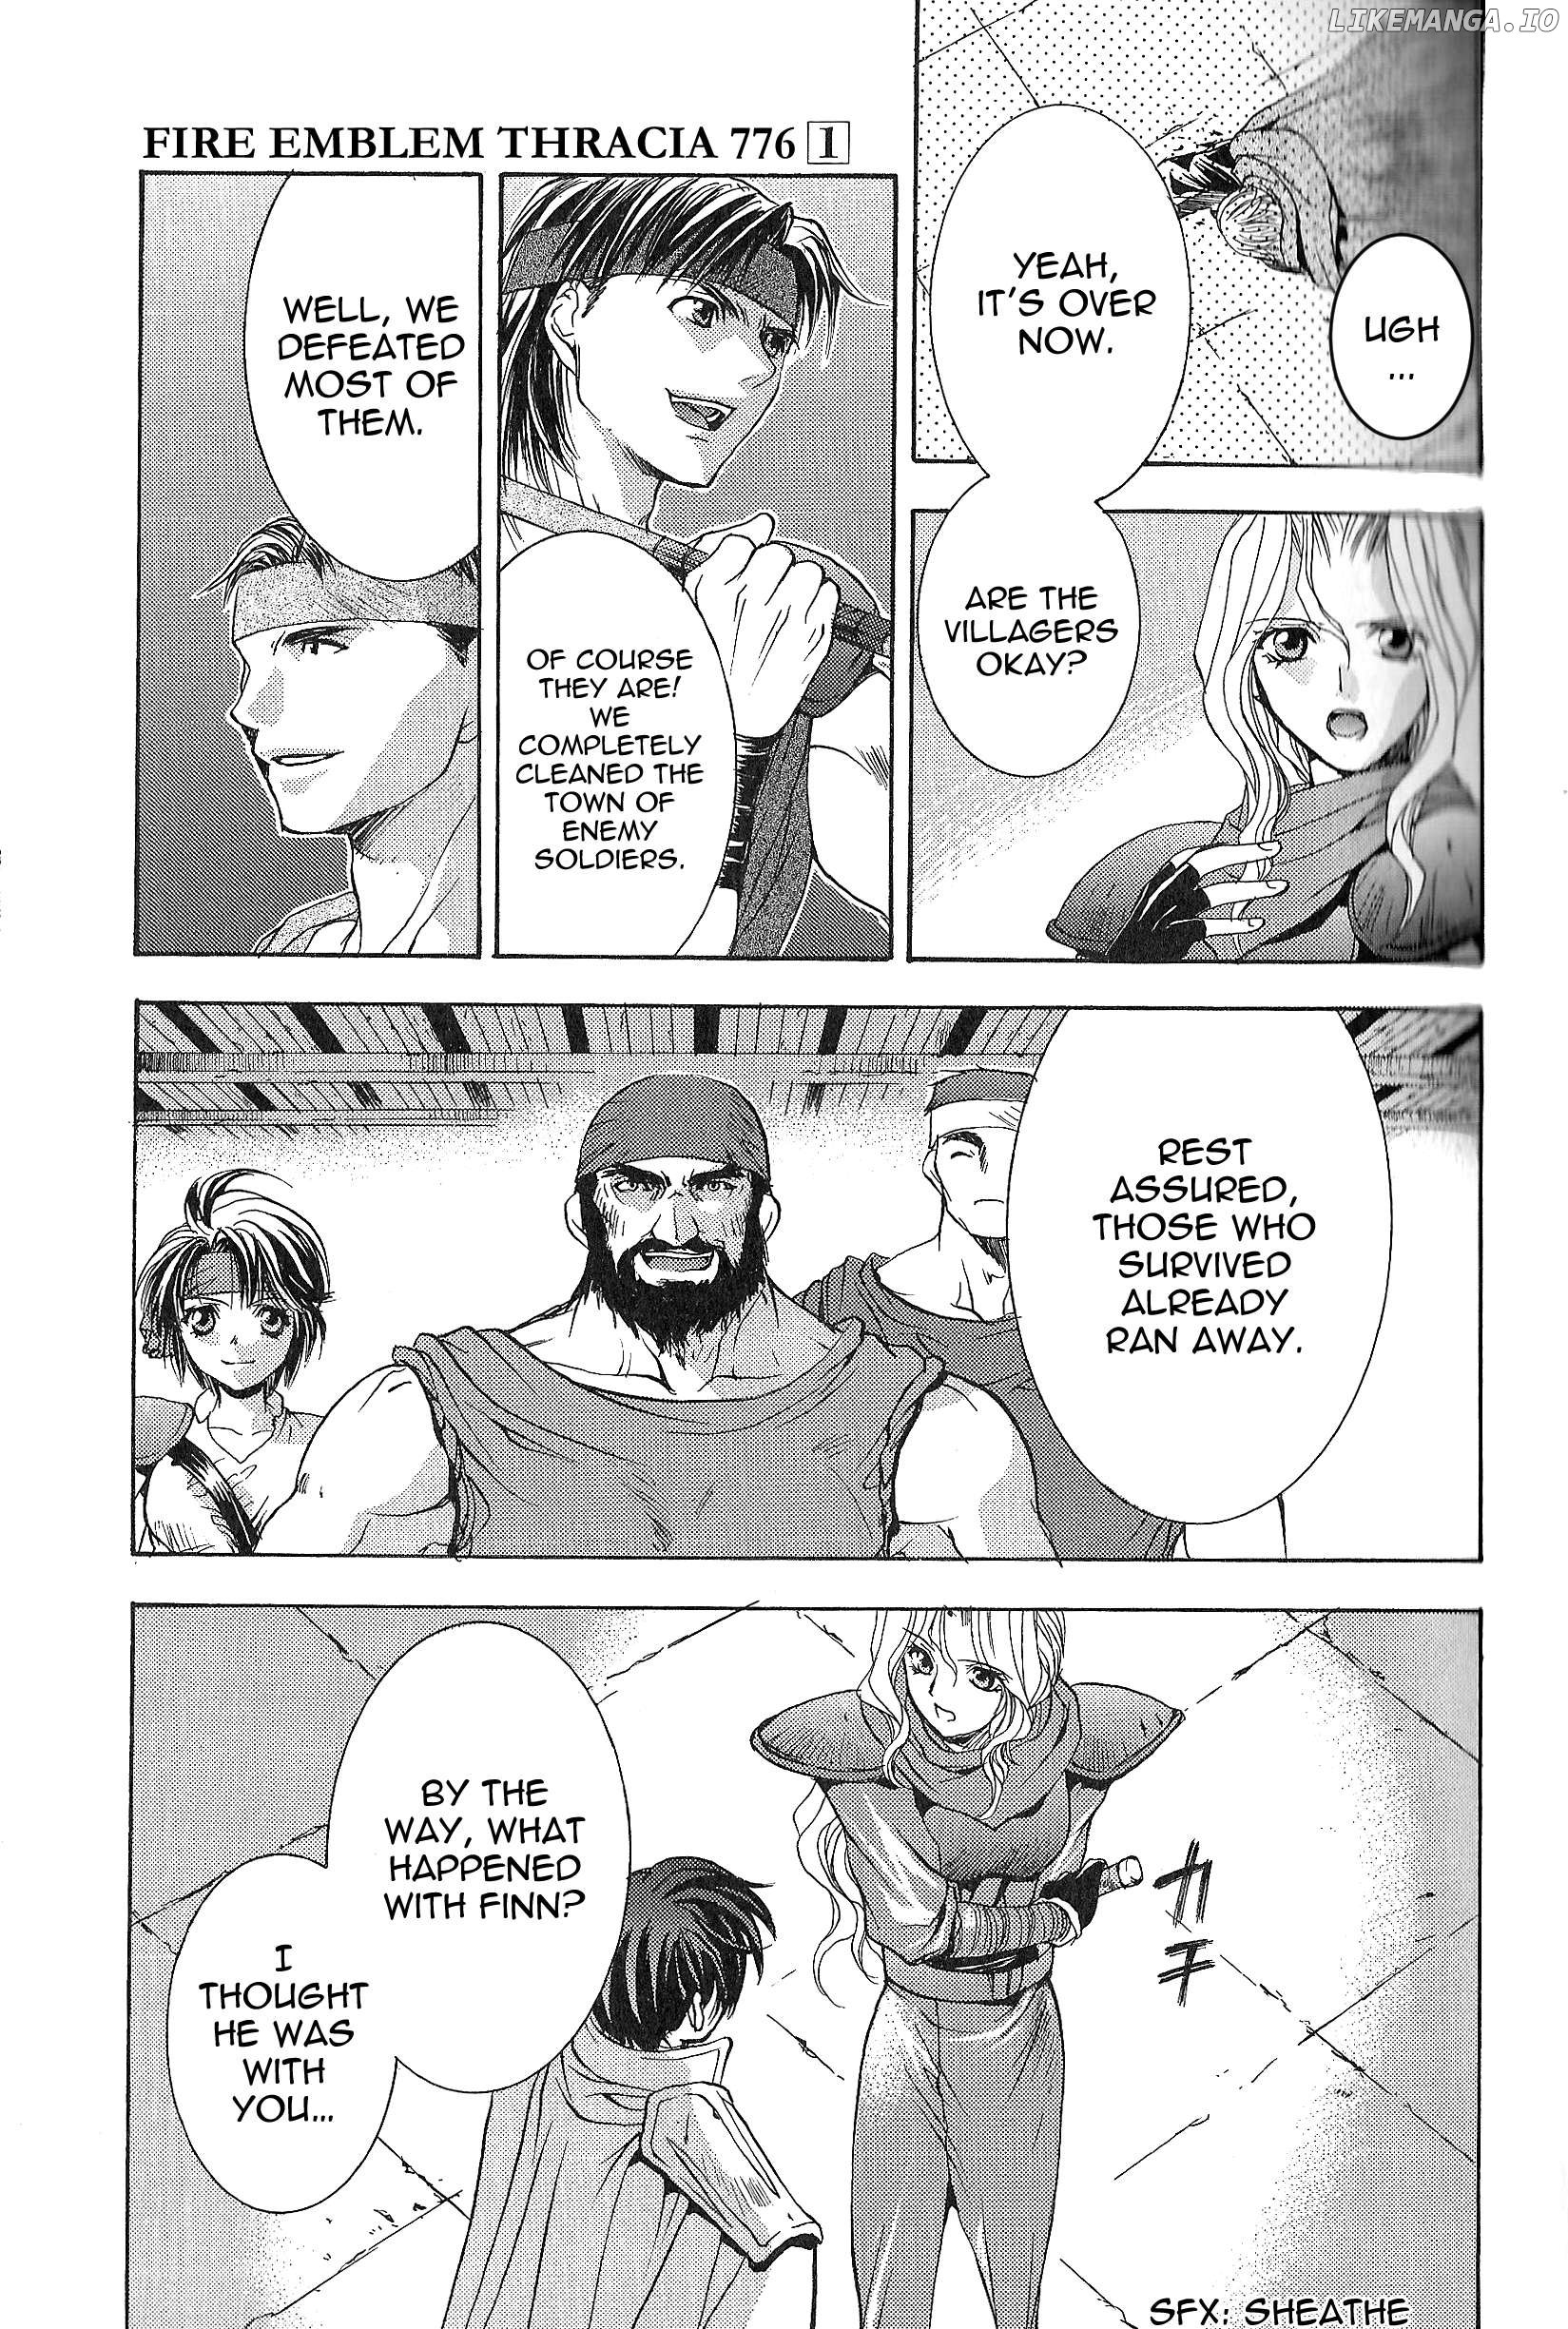 Fire Emblem - Thracia 776 Chapter 3 - page 20